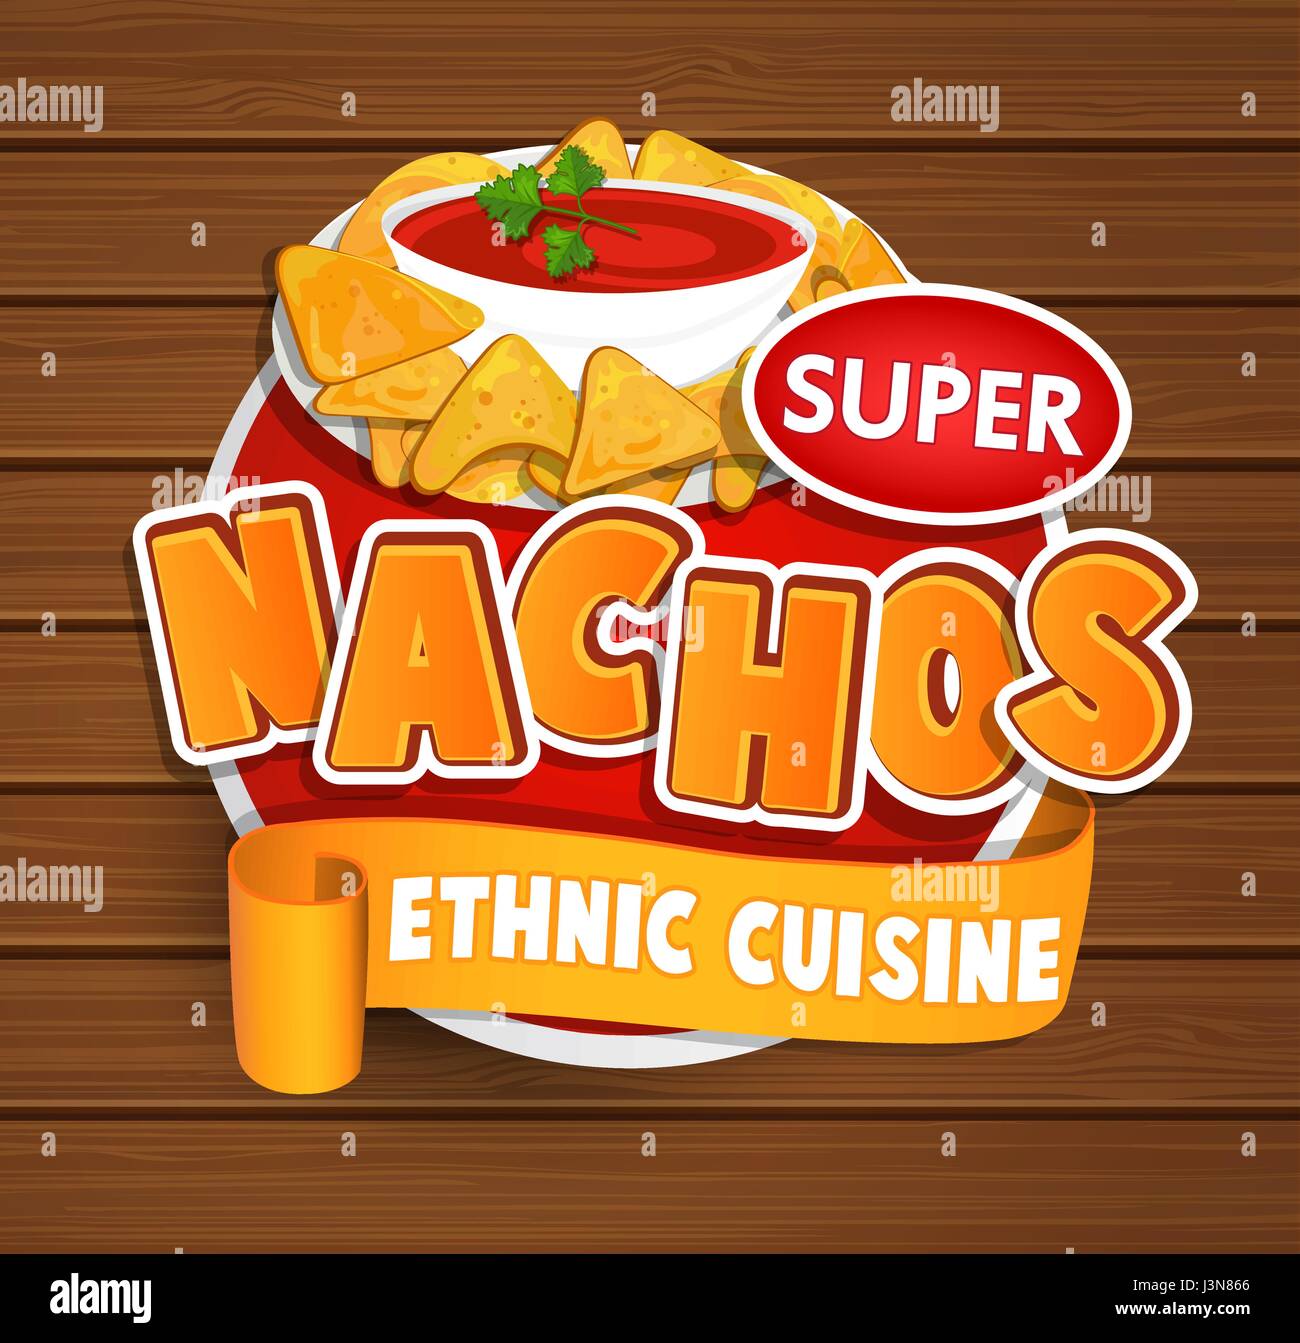 Nachos ethnic cuisine logo and food label or sticker. Concept of mexican food, traditional product design for shops, markets.Vector illustration. Stock Vector